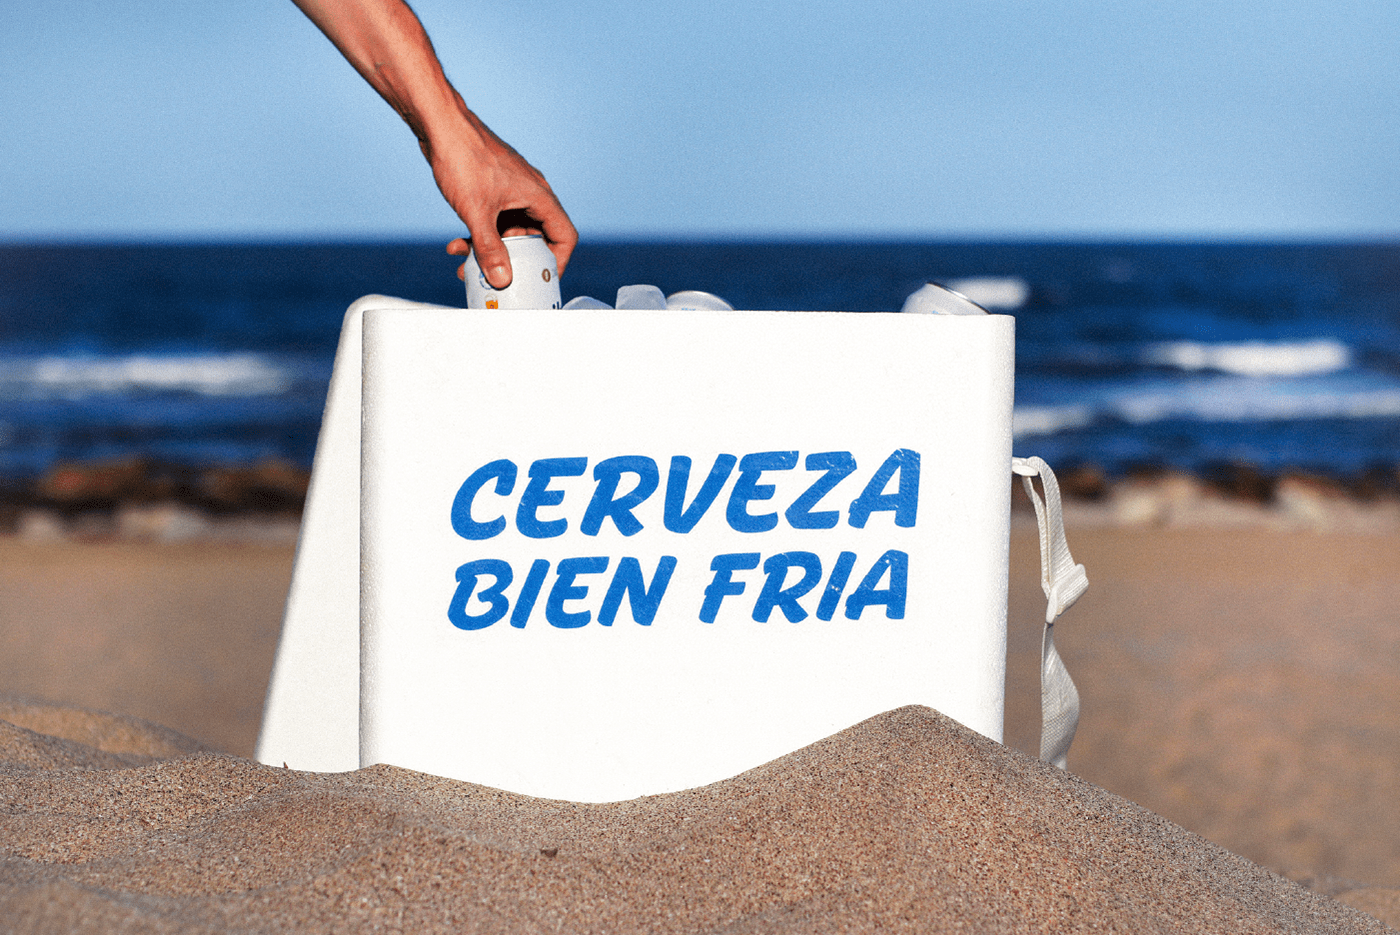 balneario font lettering panco photo Script sudtipos tipography type